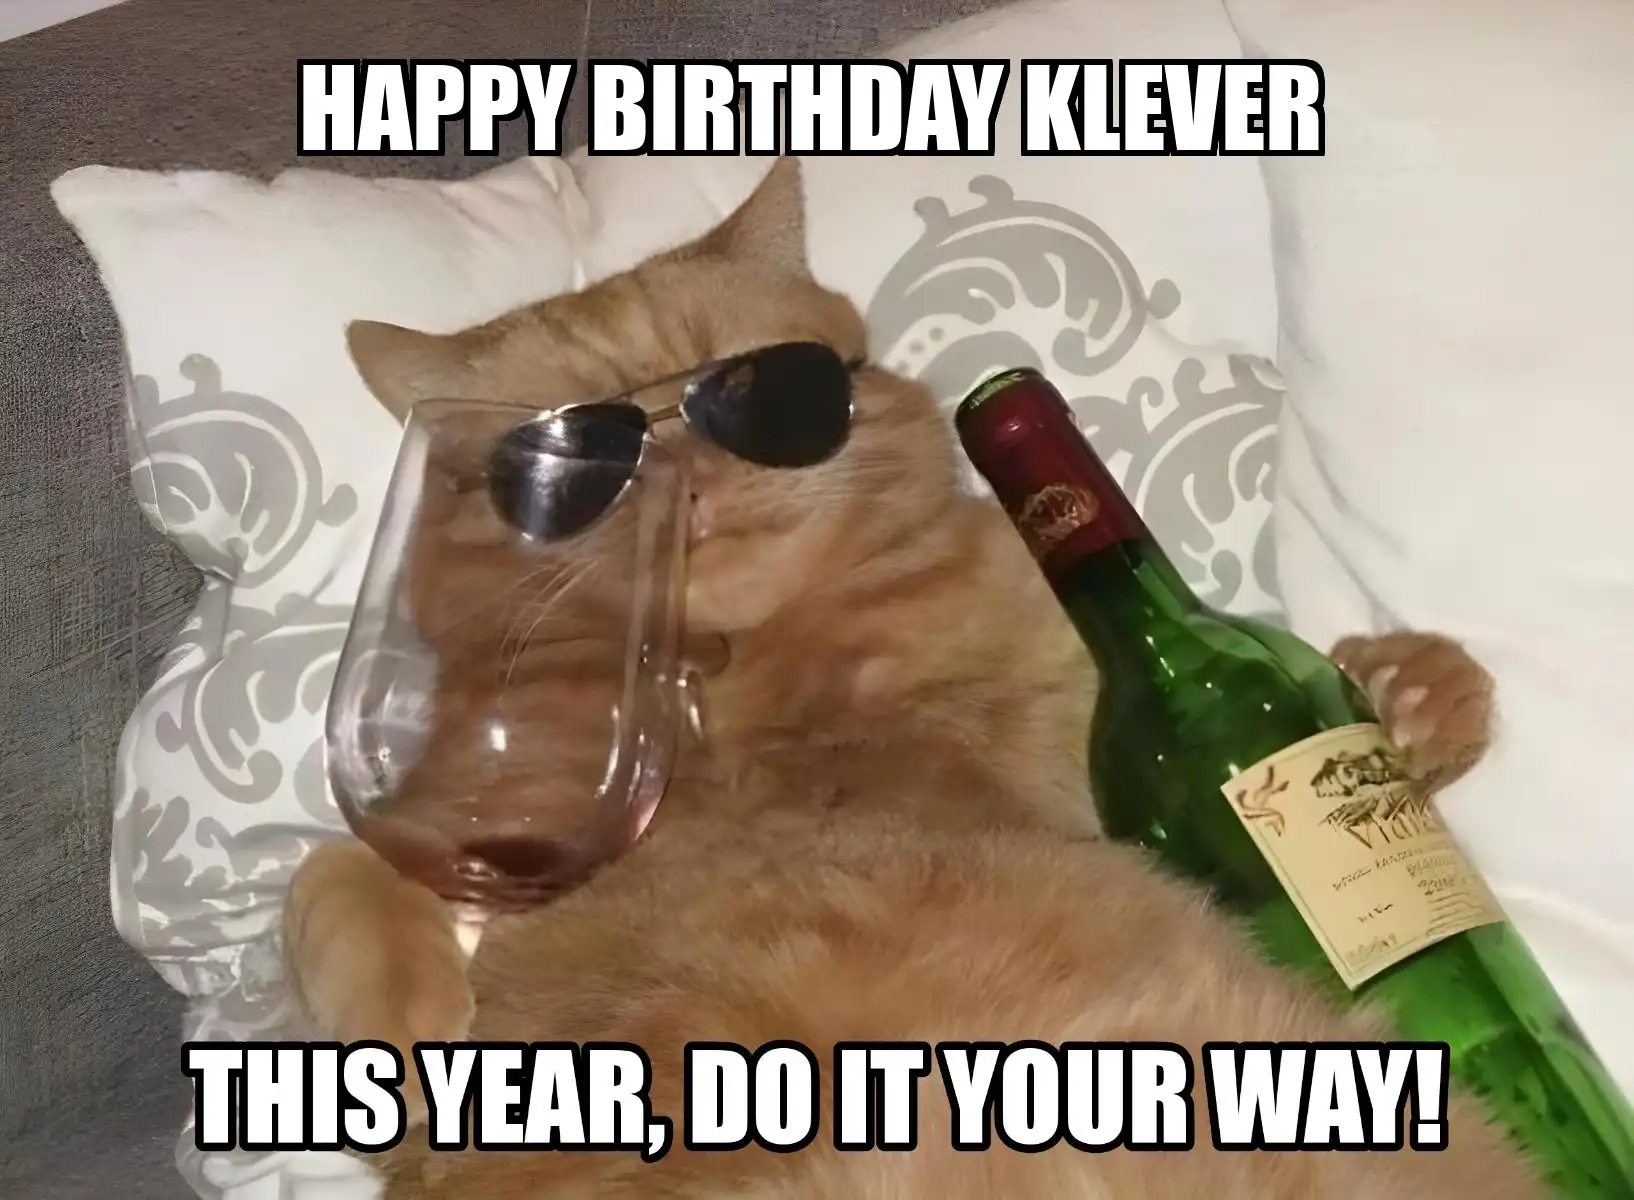 Happy Birthday Klever This Year Do It Your Way Meme